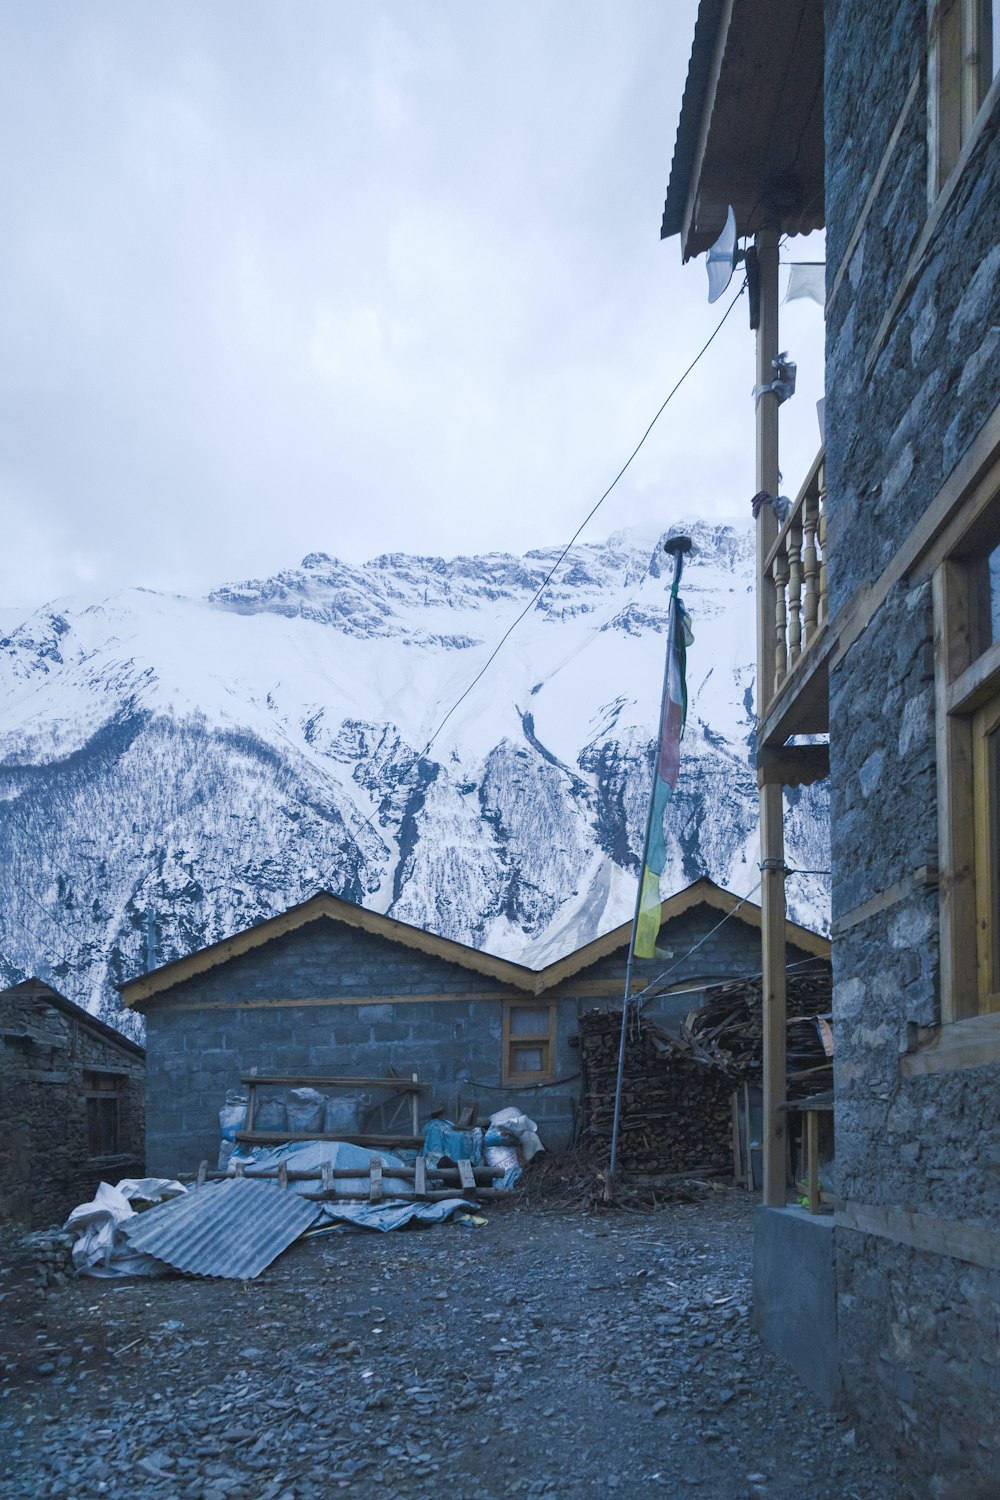 a building with a flag in front of a snowy mountain